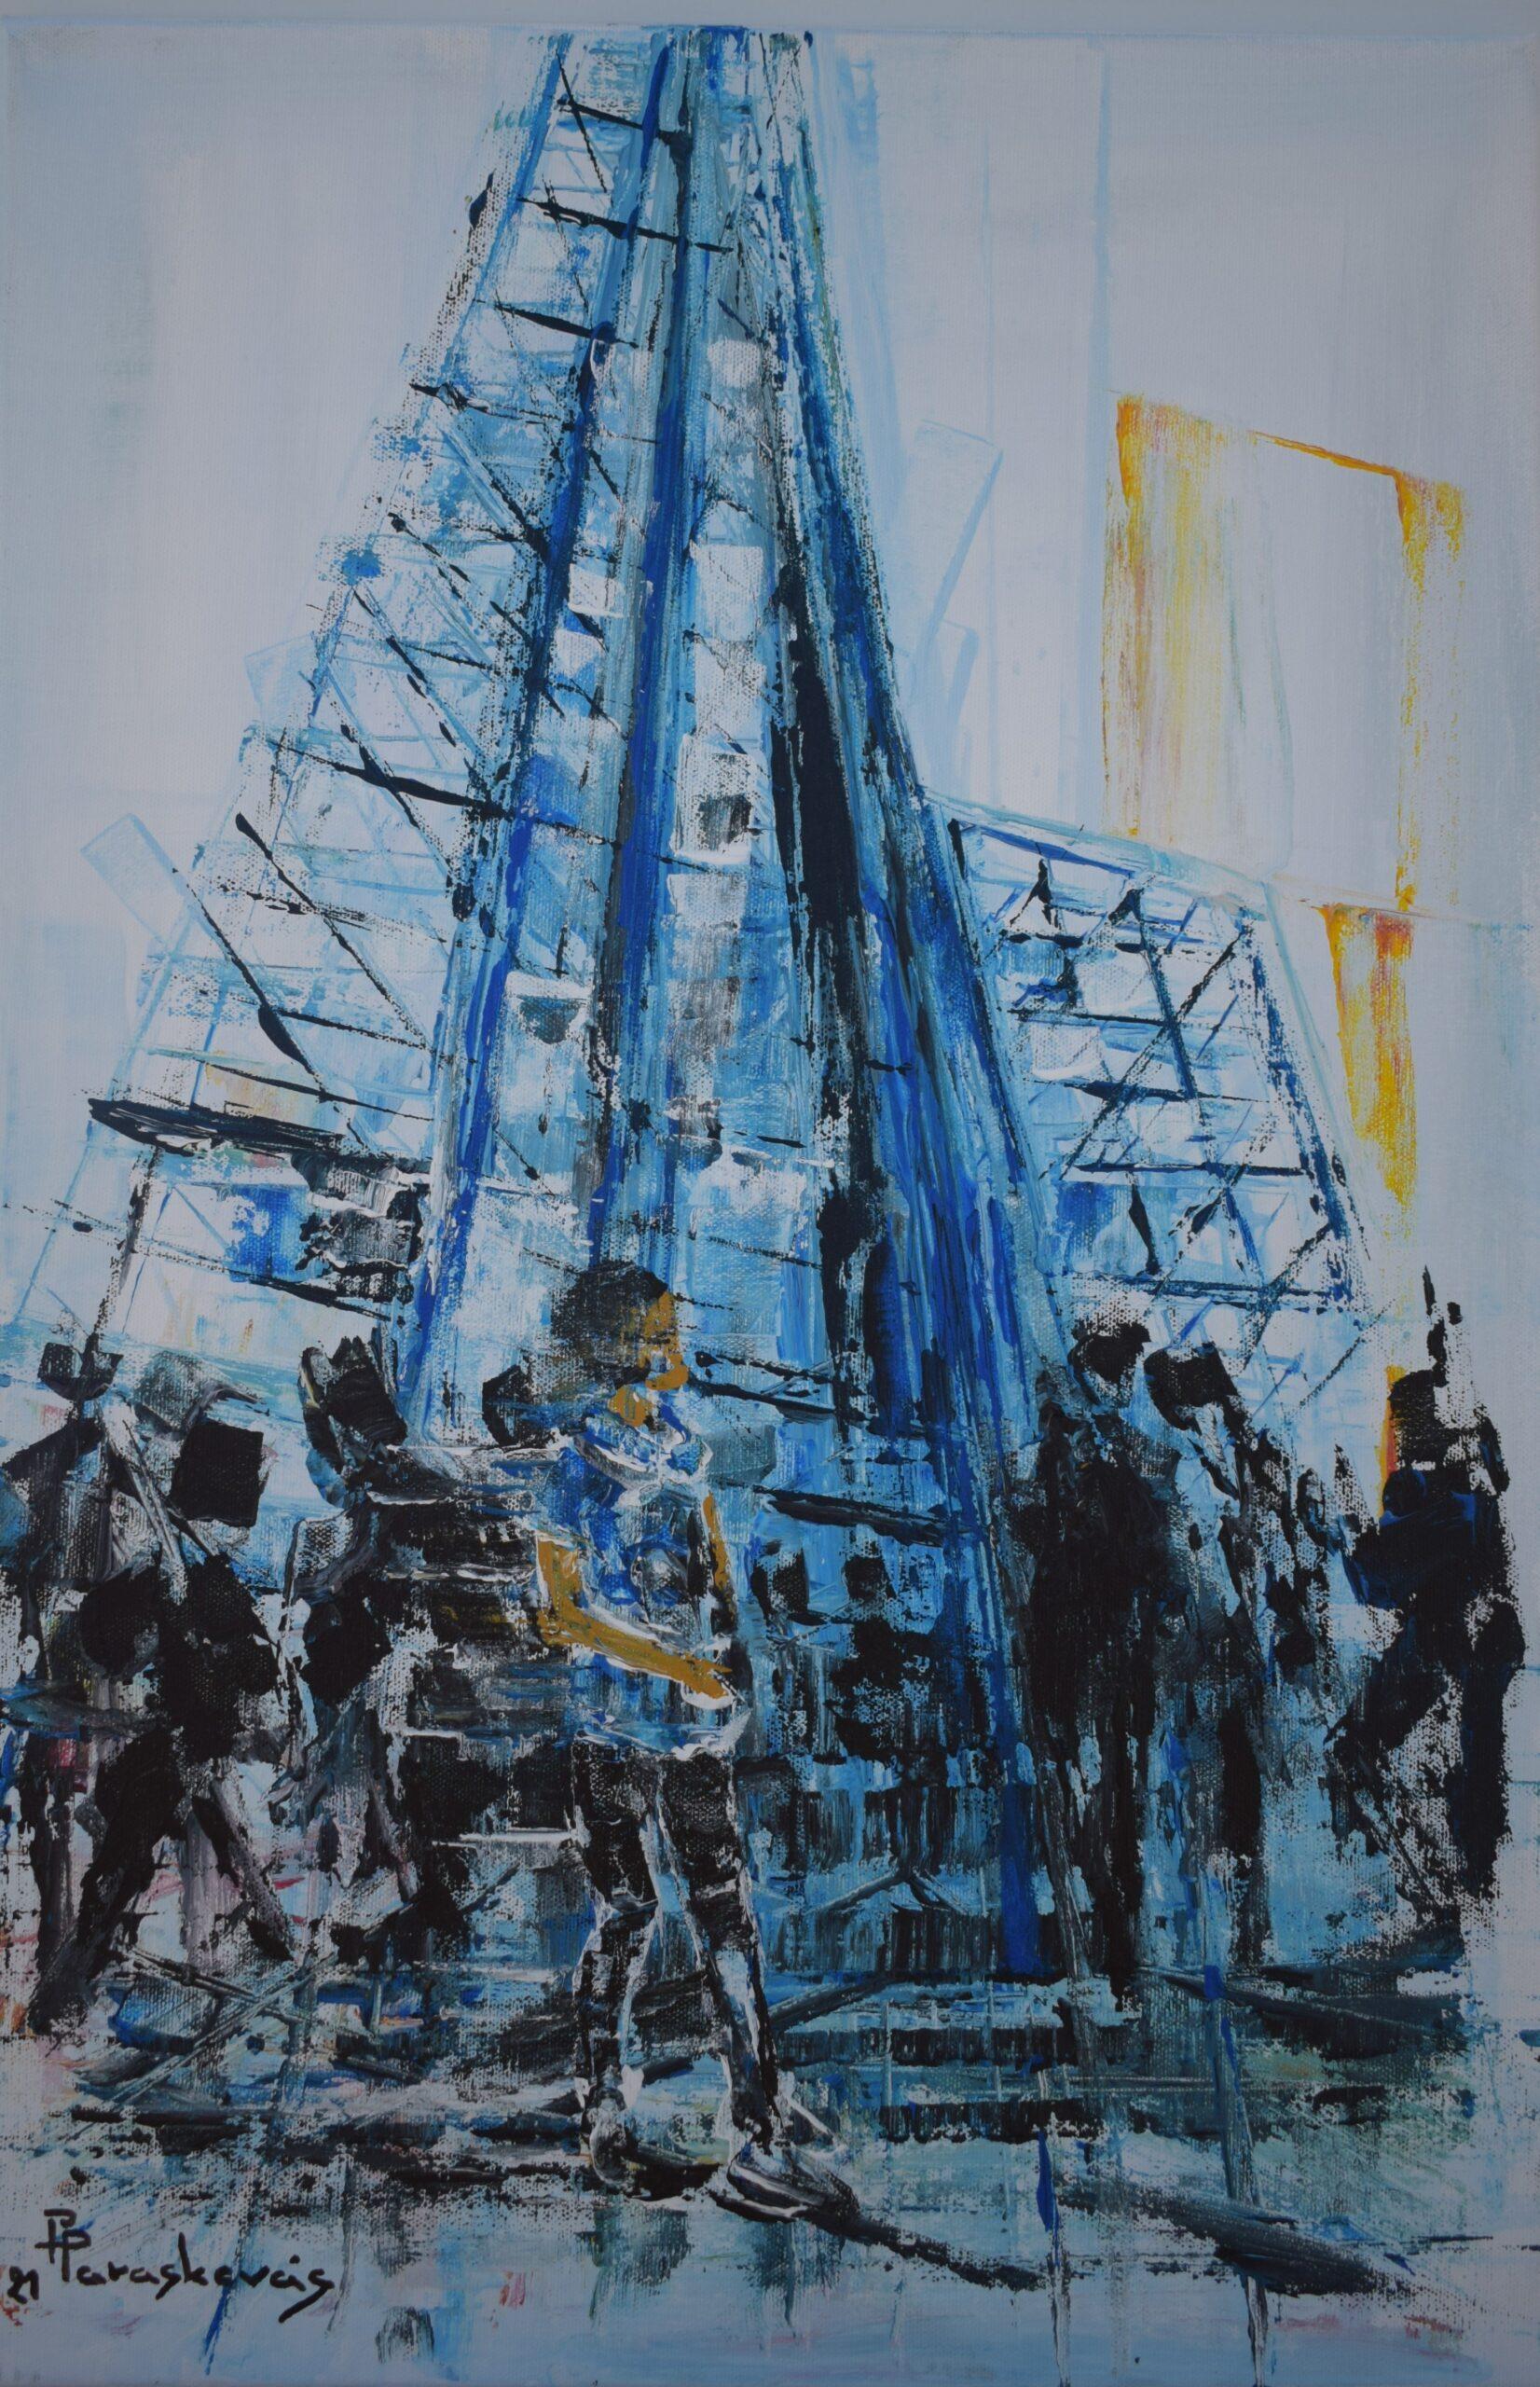 LIFE IN THE CITY I - Painting by PARASKEVAS PAPADOPOULOS